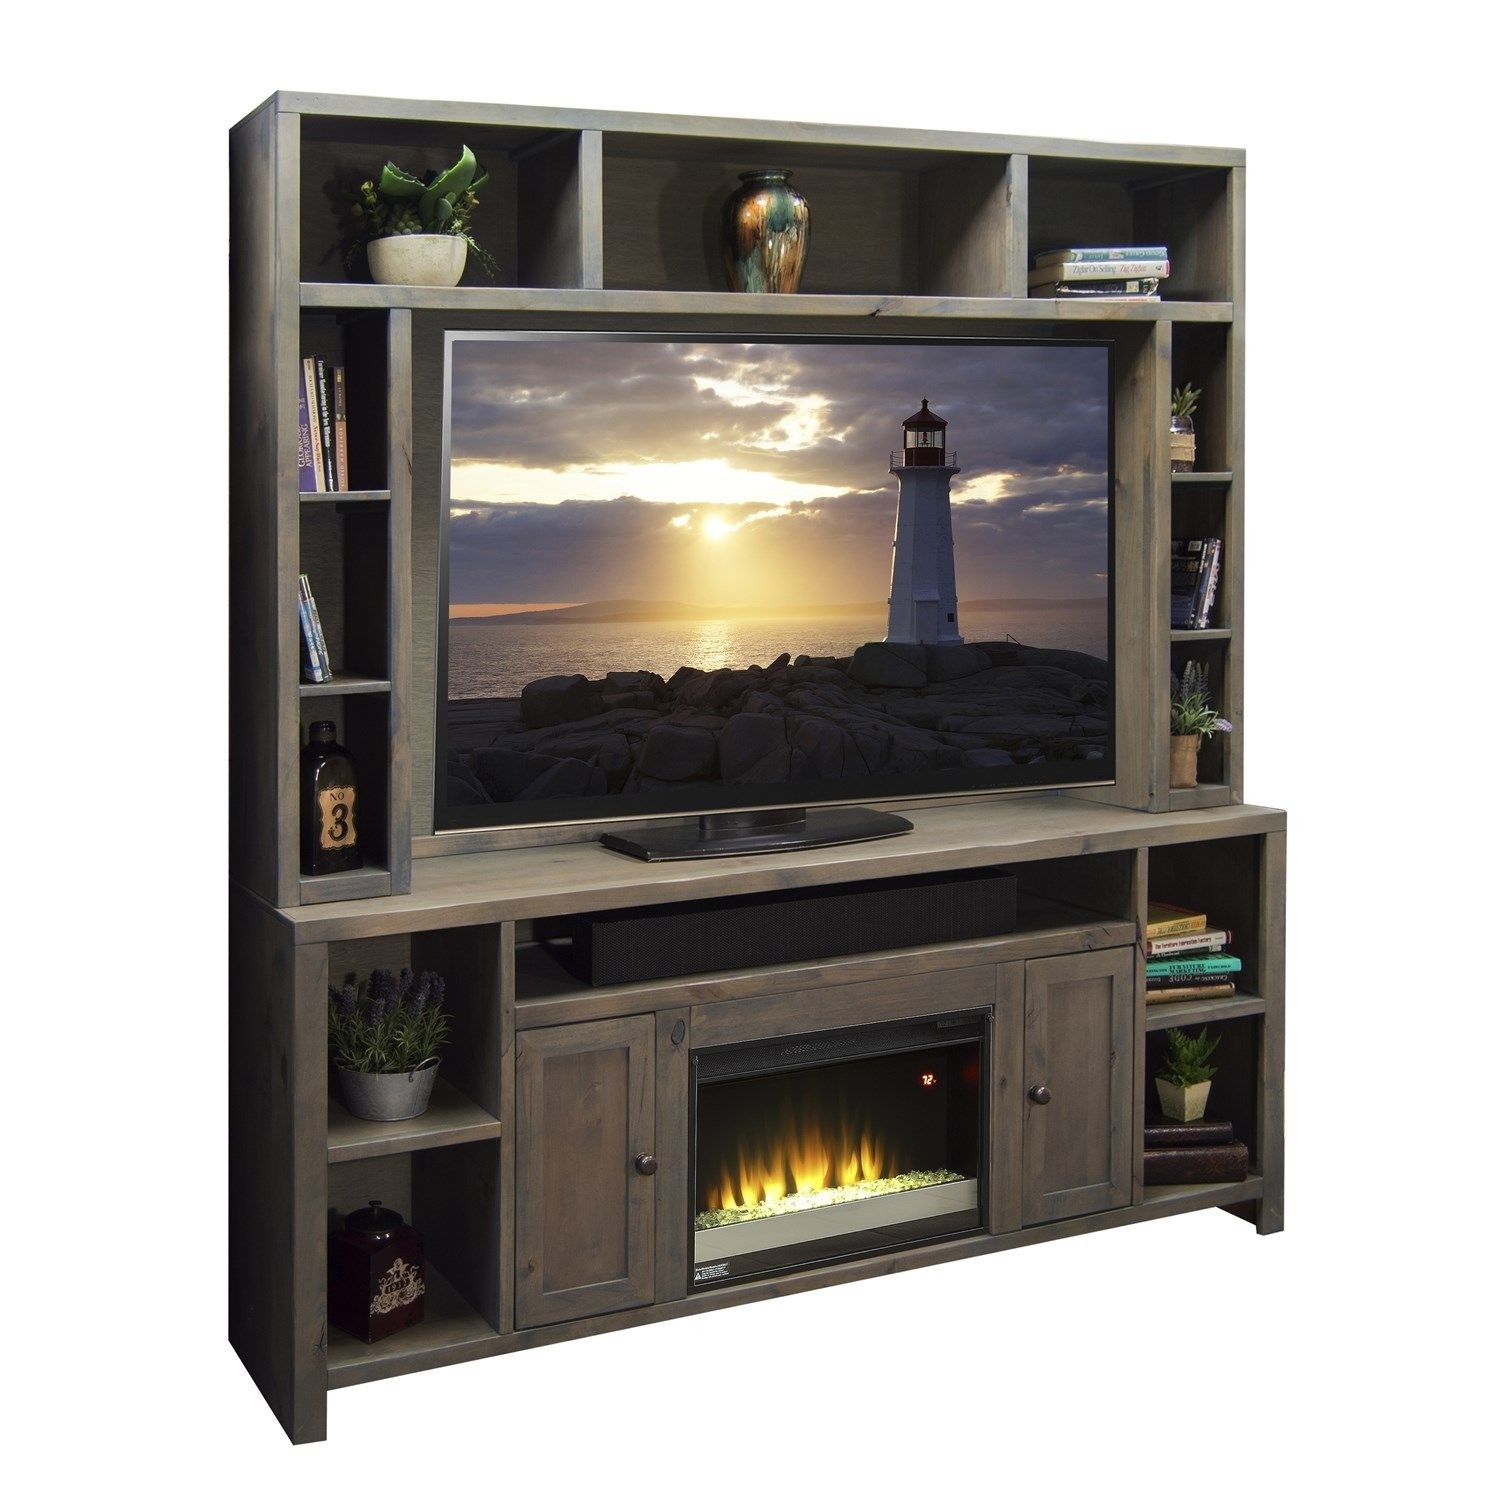 Legends furniture joshua creek 84 tv stand with electric fireplace